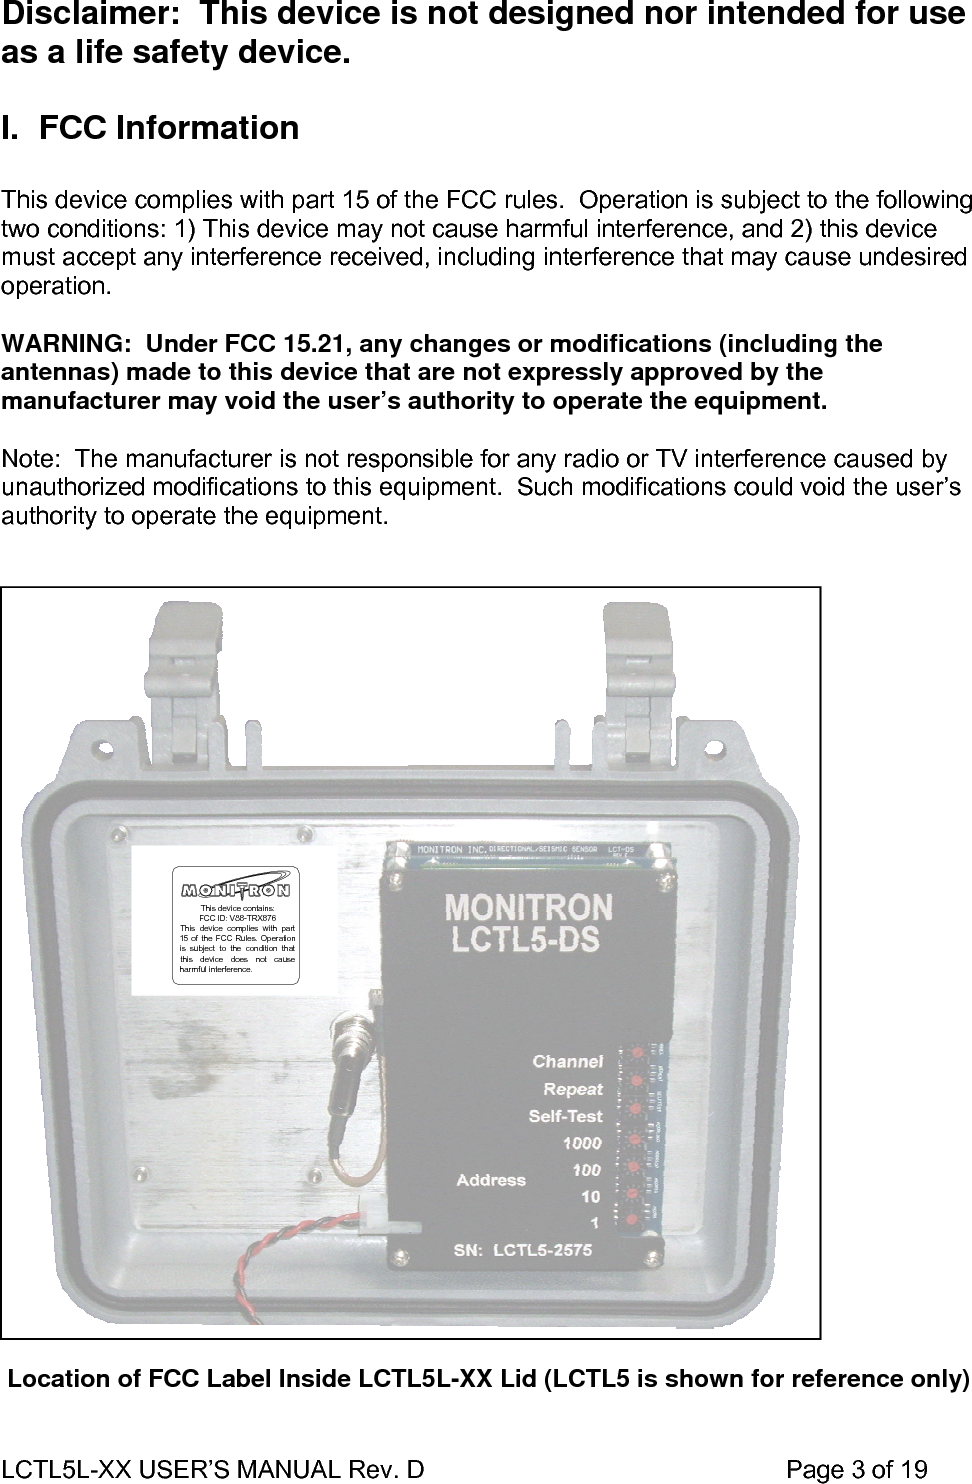 LCTL5L-XX USER’S MANUAL Rev. D                                                    Page 3 of 19  Disclaimer:  This device is not designed nor intended for use as a life safety device.  I. FCC Information  This device complies with part 15 of the FCC rules.  Operation is subject to the following two conditions: 1) This device may not cause harmful interference, and 2) this device must accept any interference received, including interference that may cause undesired operation.  WARNING:  Under FCC 15.21, any changes or modifications (including the antennas) made to this device that are not expressly approved by the manufacturer may void the user’s authority to operate the equipment.  Note:  The manufacturer is not responsible for any radio or TV interference caused by unauthorized modifications to this equipment.  Such modifications could void the user’s authority to operate the equipment.                              Location of FCC Label Inside LCTL5L-XX Lid (LCTL5 is shown for reference only)   This device contains:FCC ID: V88-TRX876This device complies with part15 of the FCC Rules. Operationis subject to the condition thatthis device does not causeharmful interference.